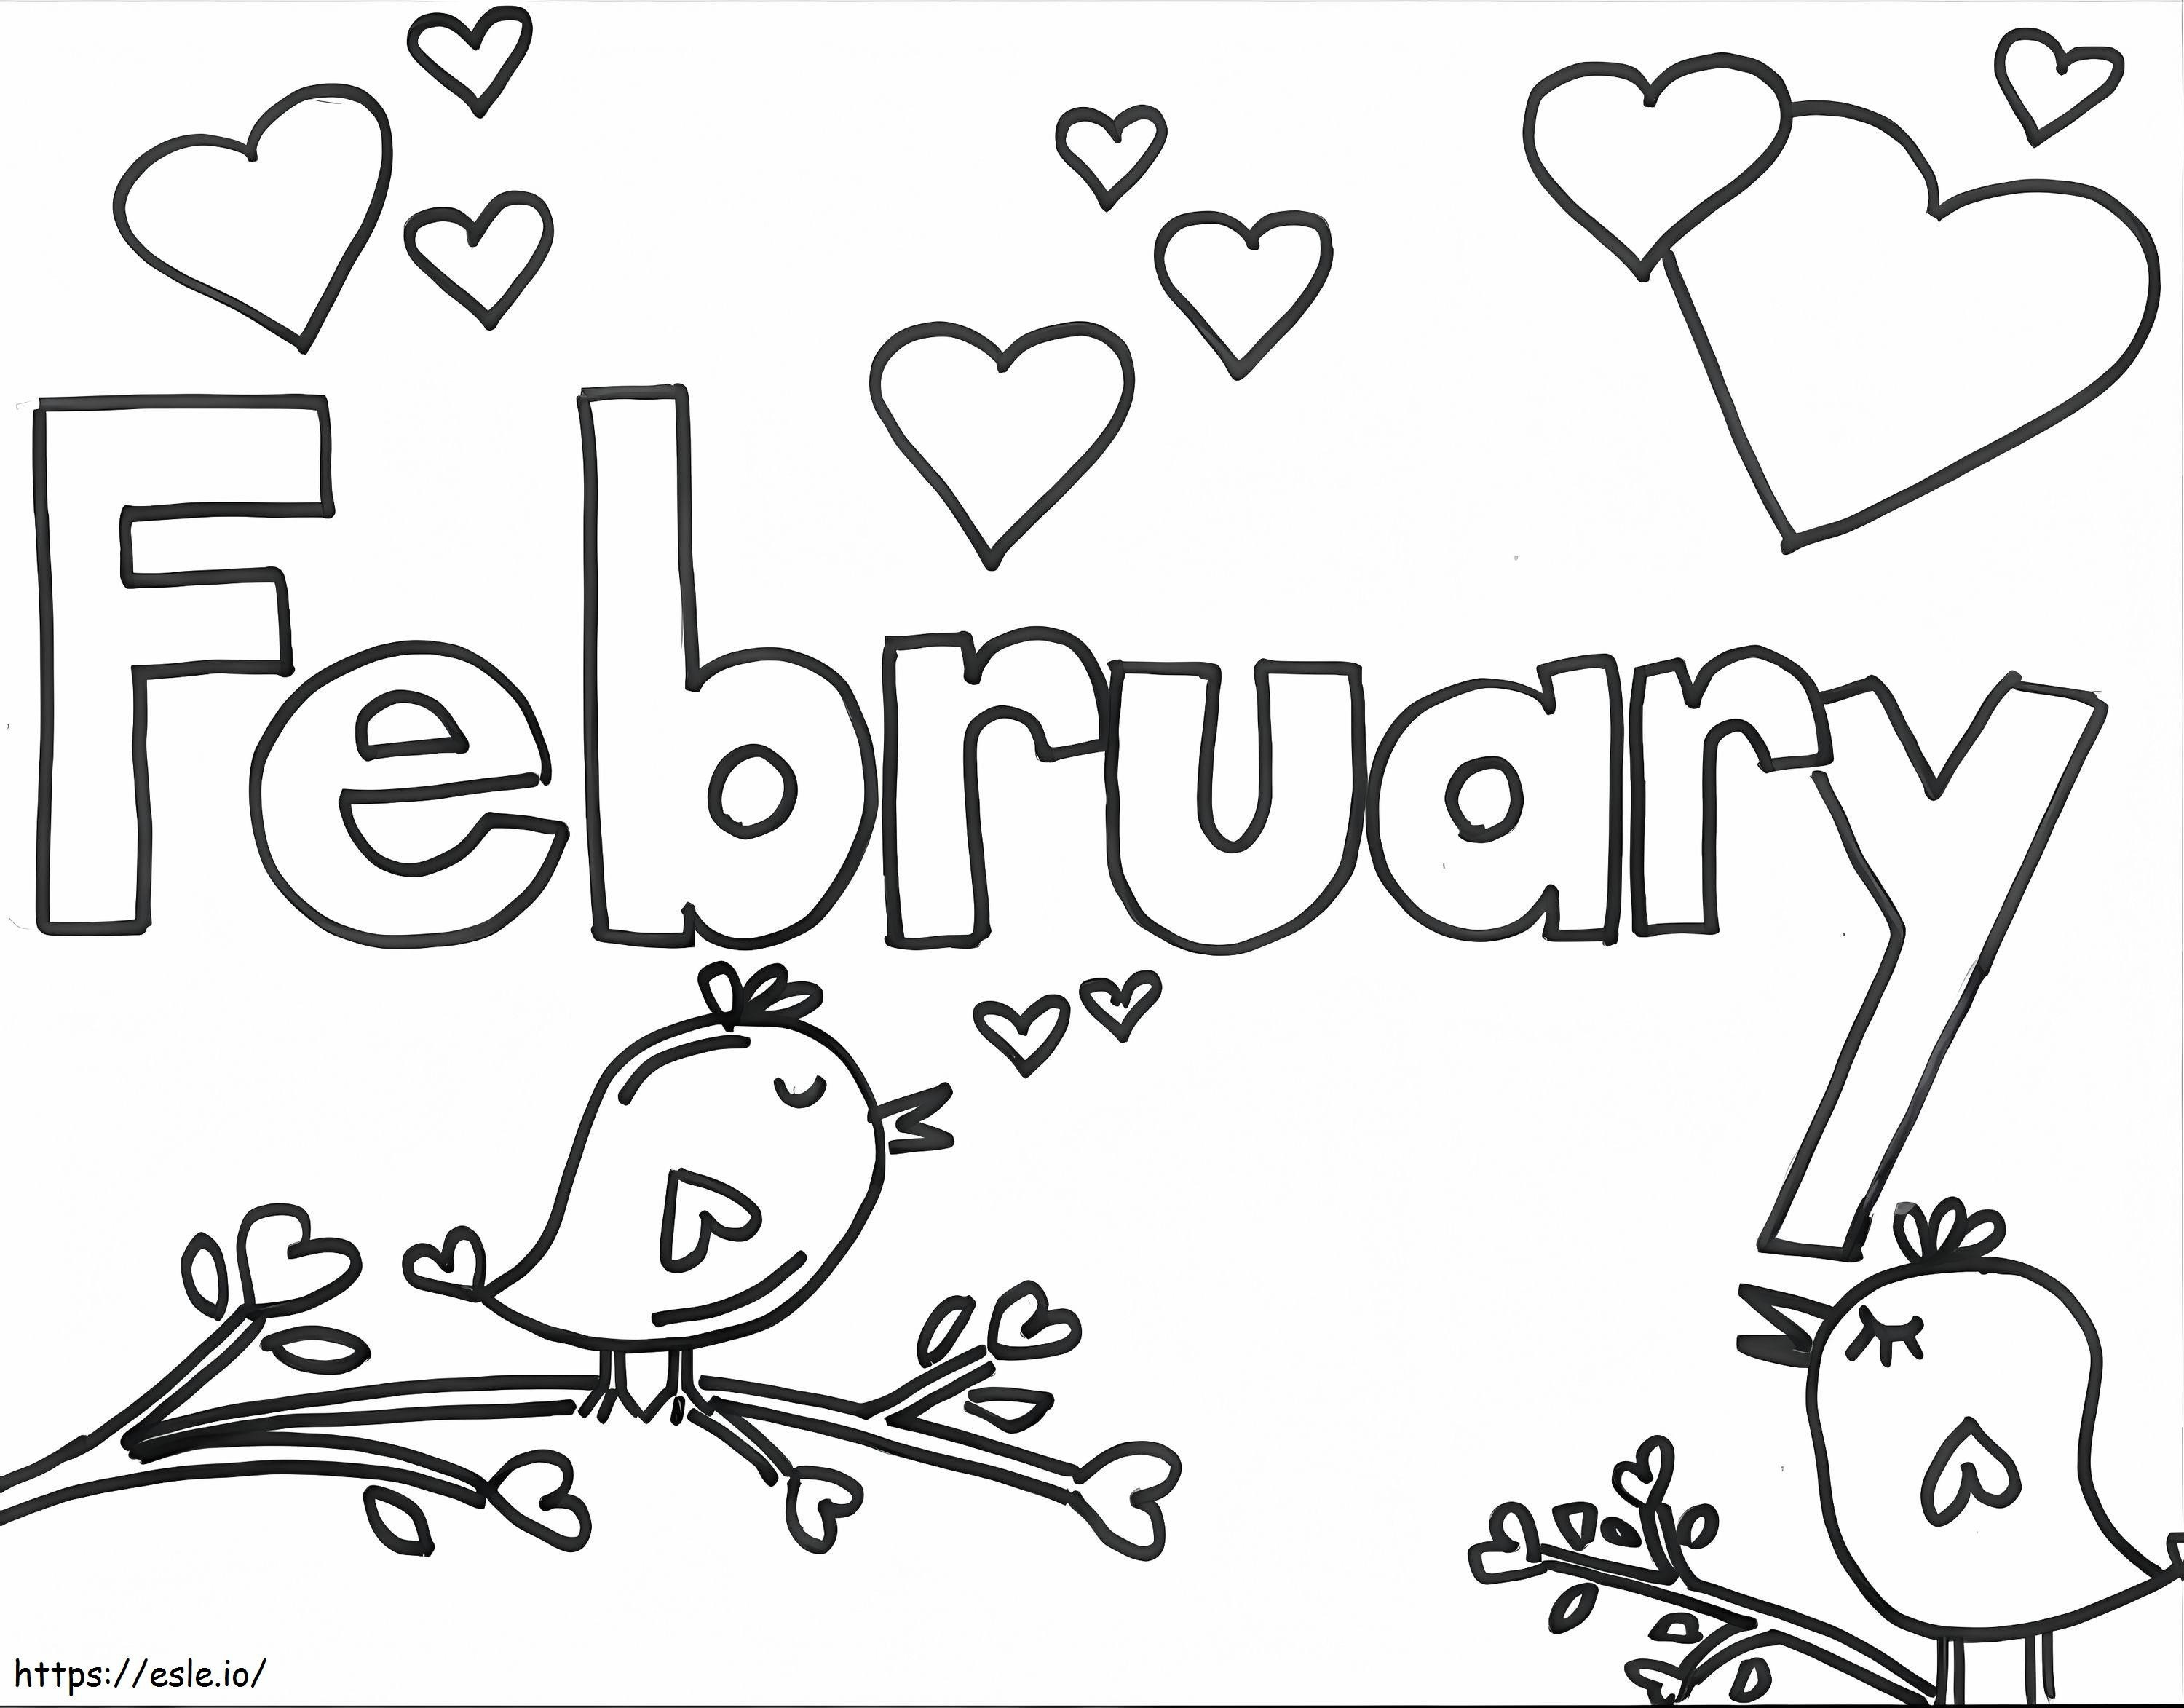 February 3Rd coloring page